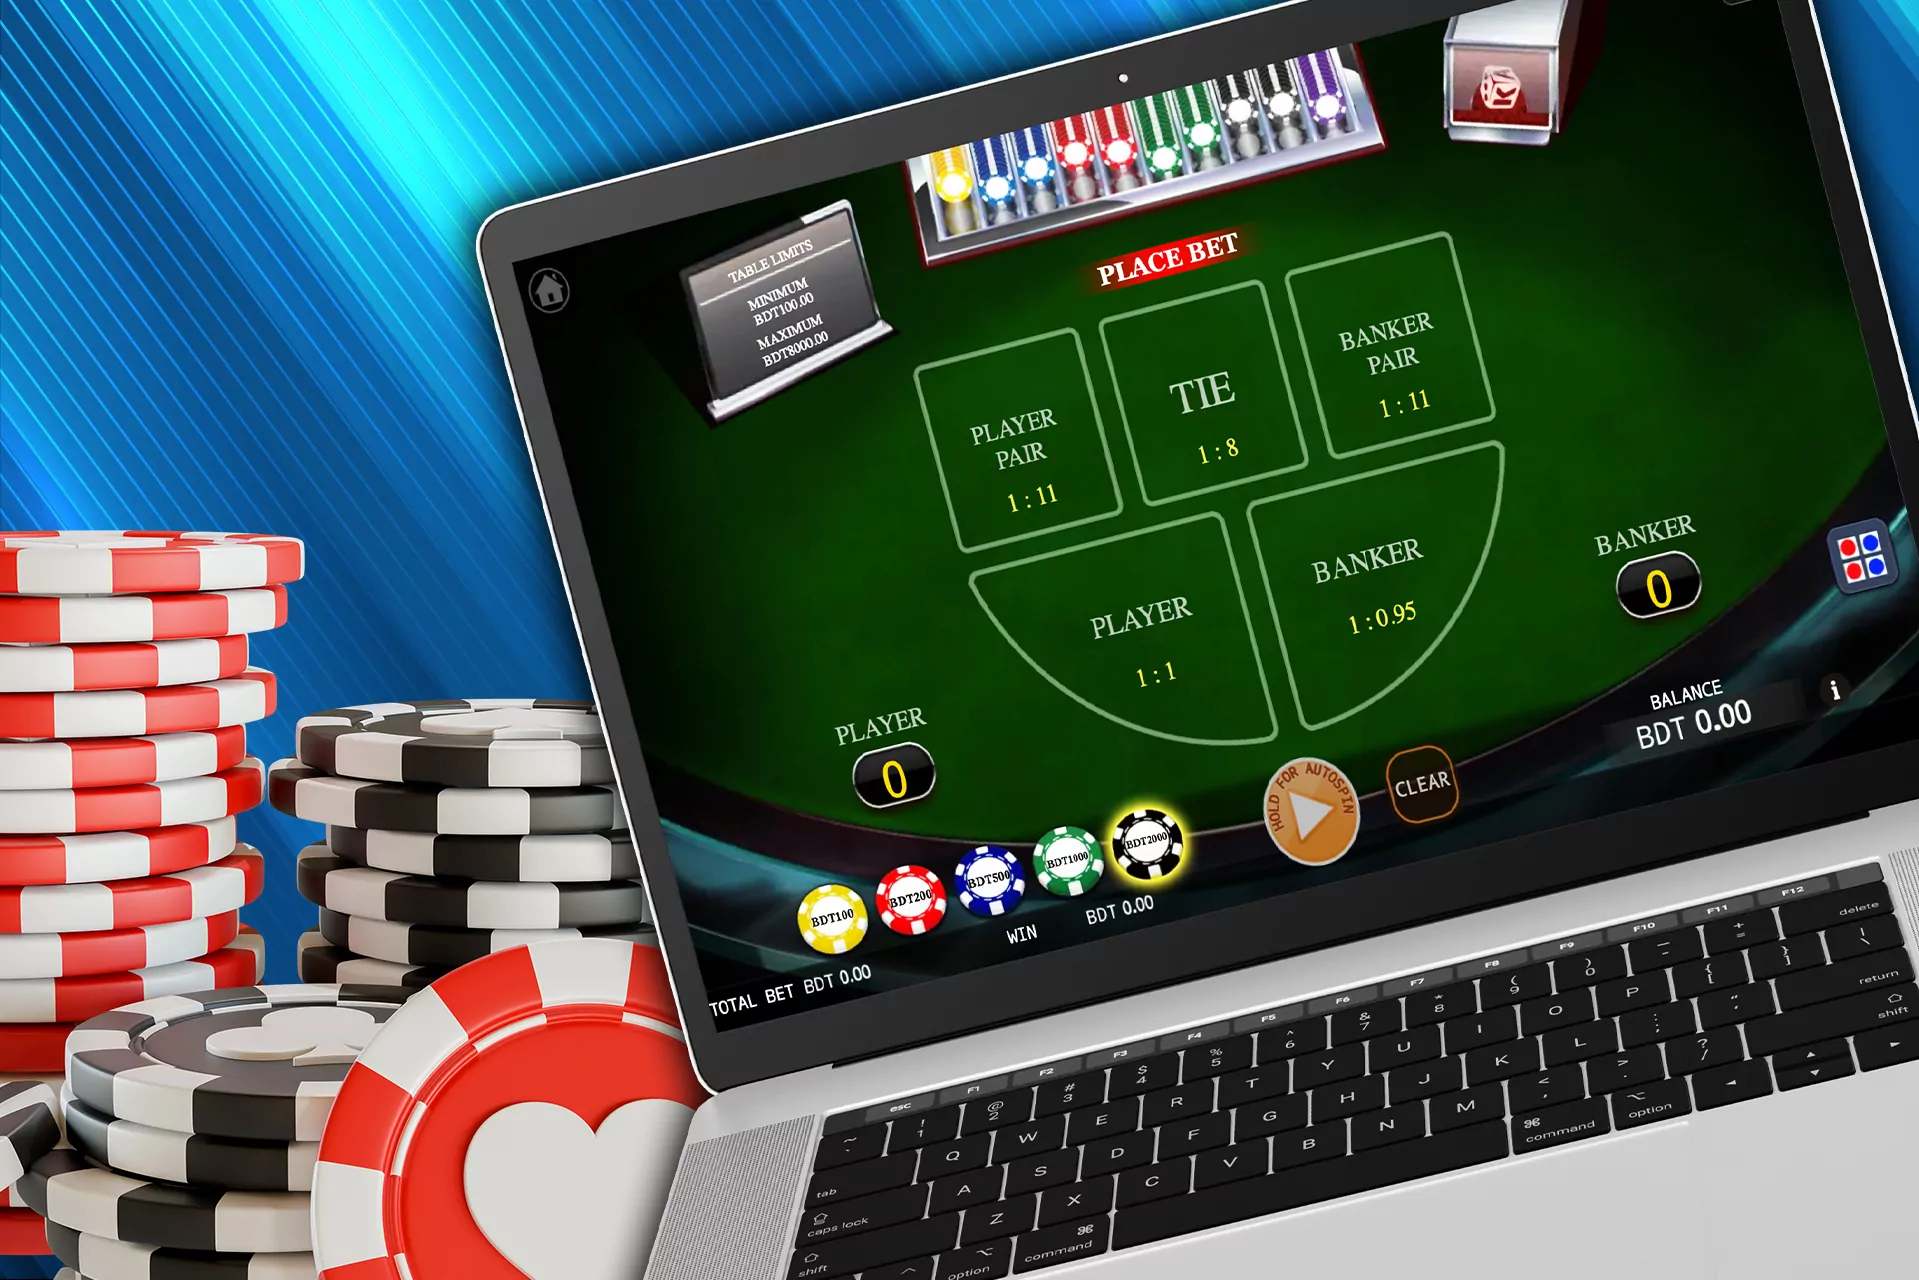 Play baccarat card game and win big money.